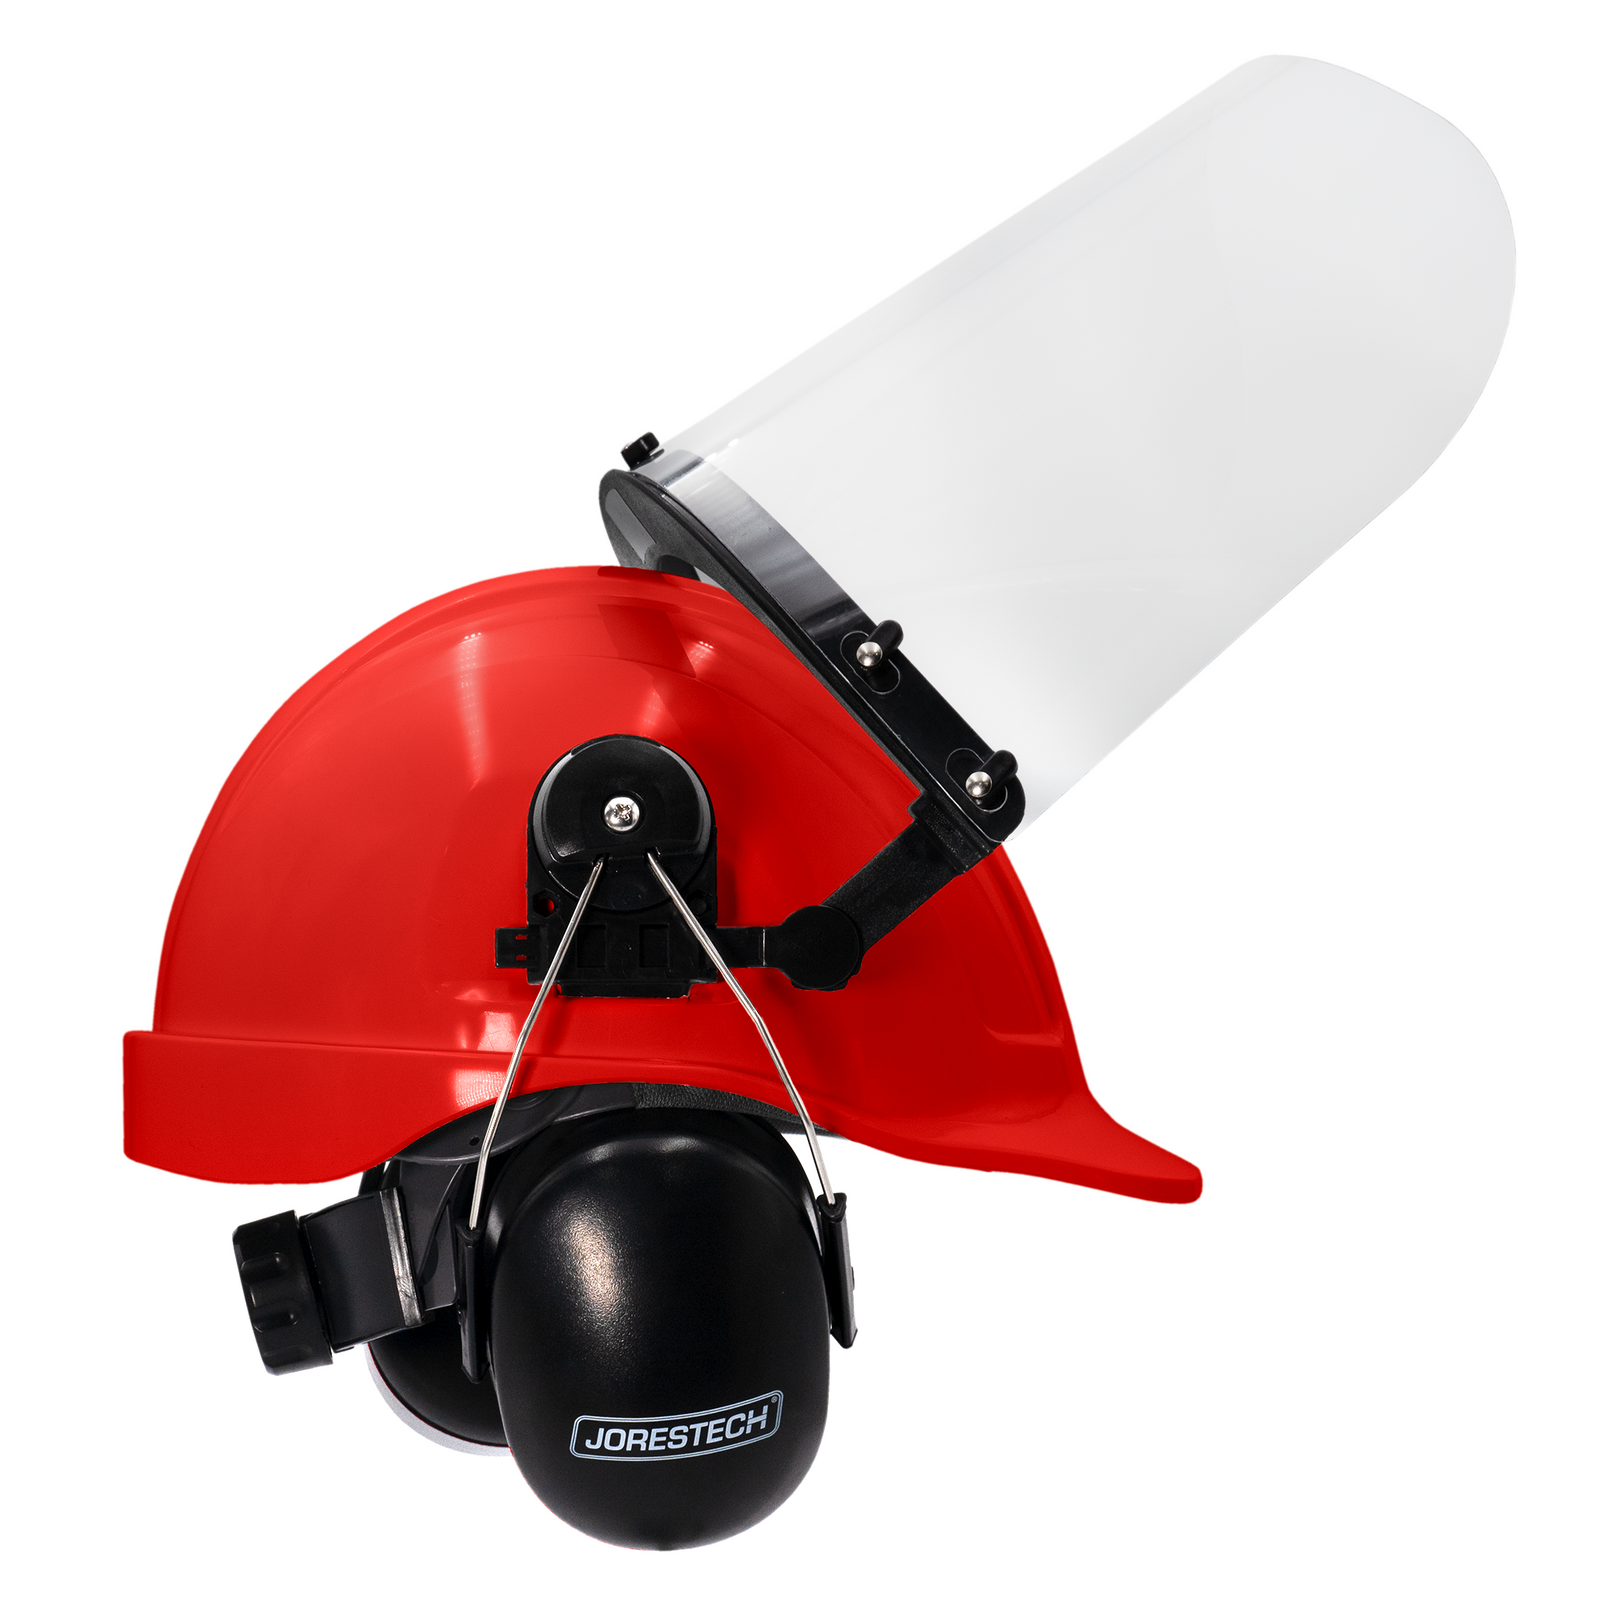 Red cap style hard hat kit with mountable earmuffs and hi-transparency face shield